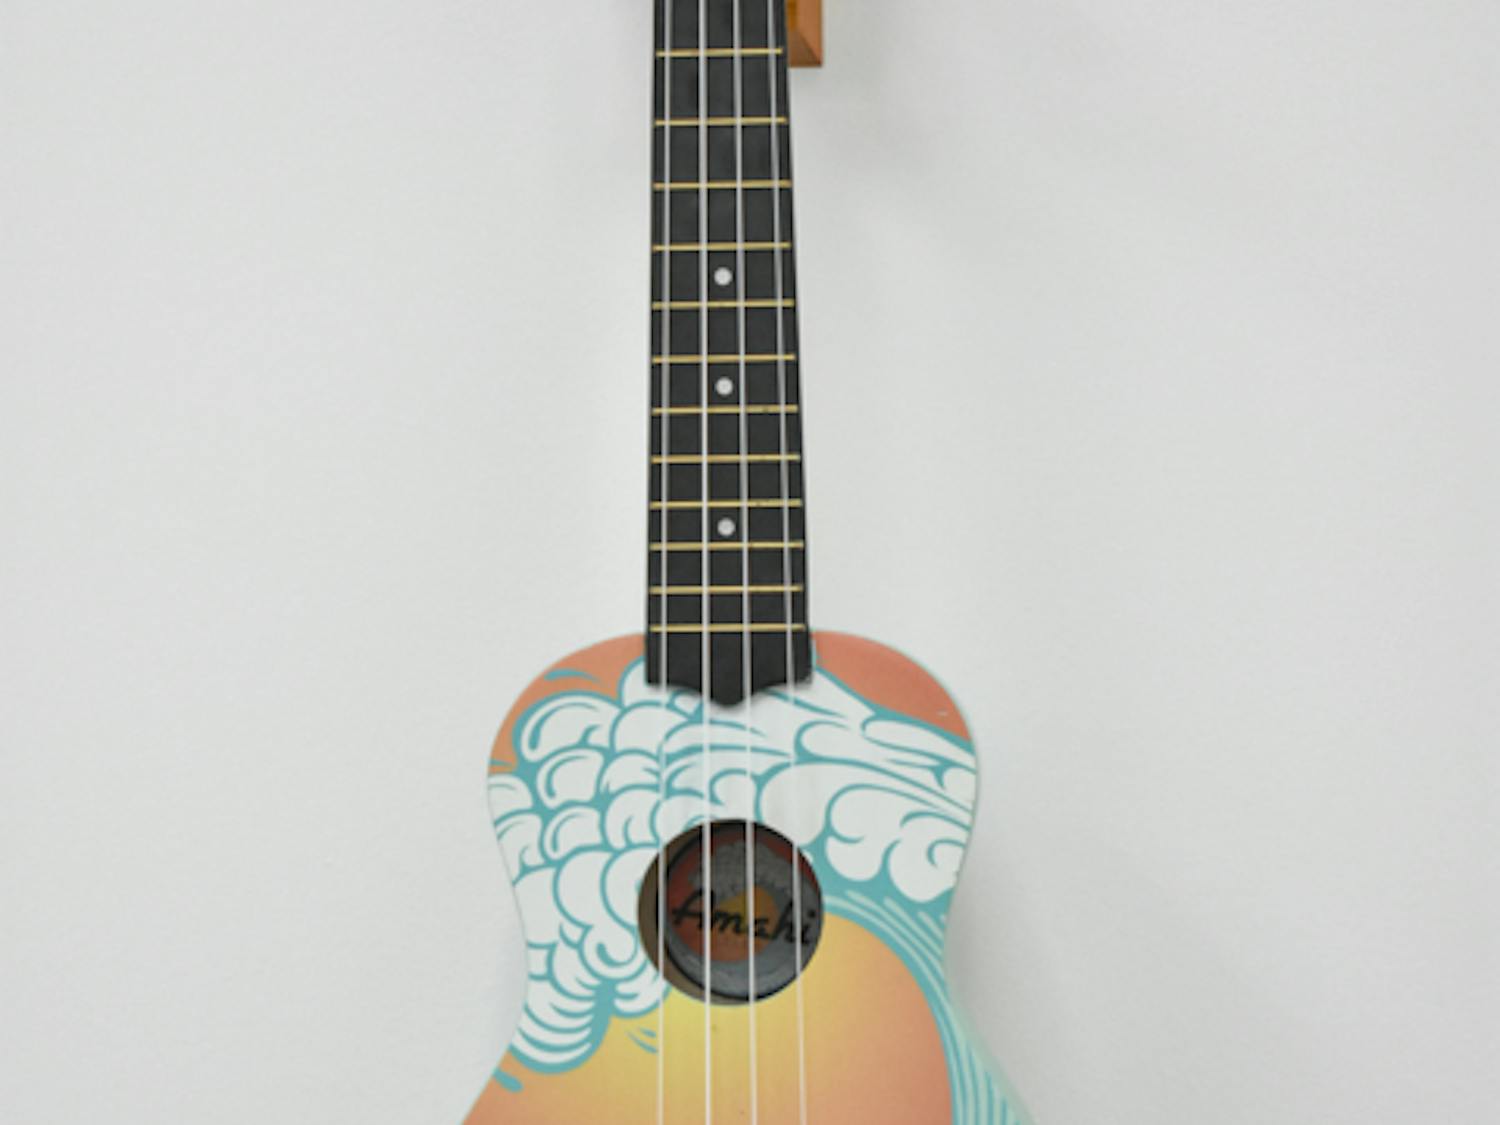 The ukulele is typically the first instrument that professionals will introduce to their patients because of its small size and fewer strings. This helps with learning how to play instruments if a patient does not have prior experience.